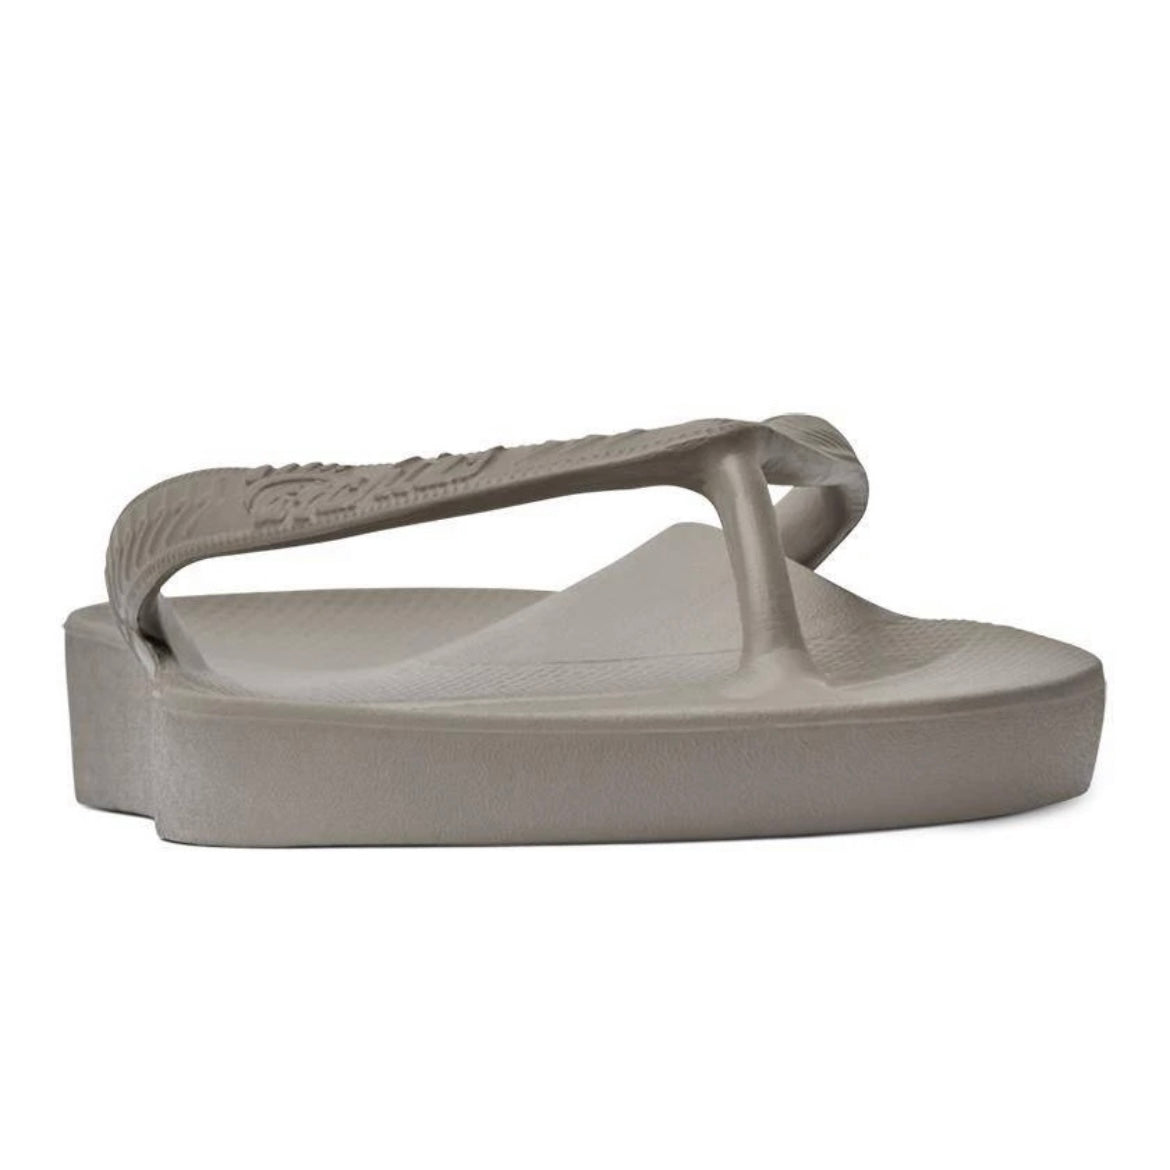 ARCHIES ARCH SUPPORT UNISEX THONG MINT